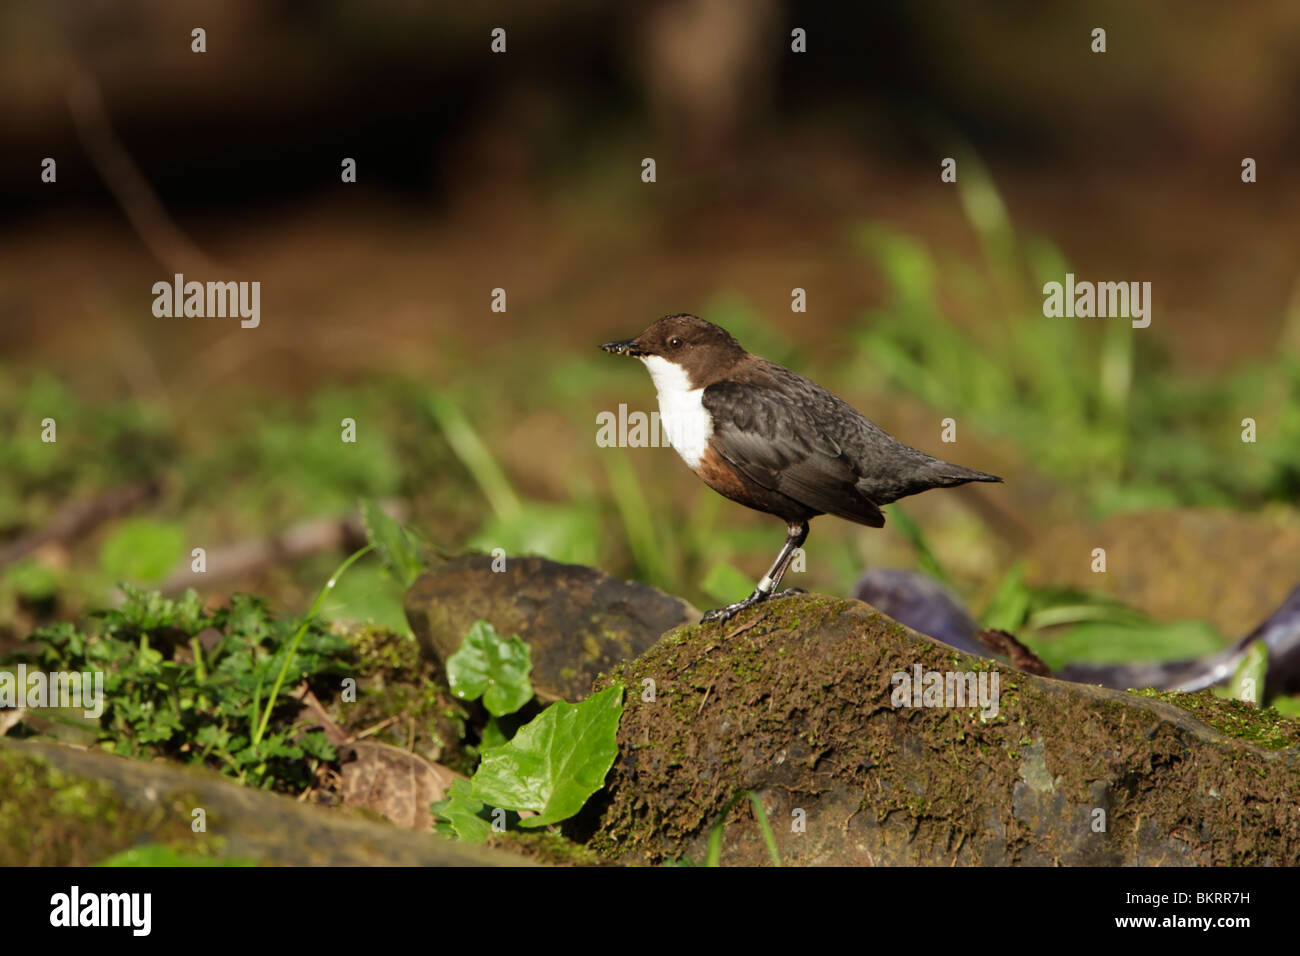 Dipper, white-throated (Cinclus cinclus) standing on mossy boulder Stock Photo